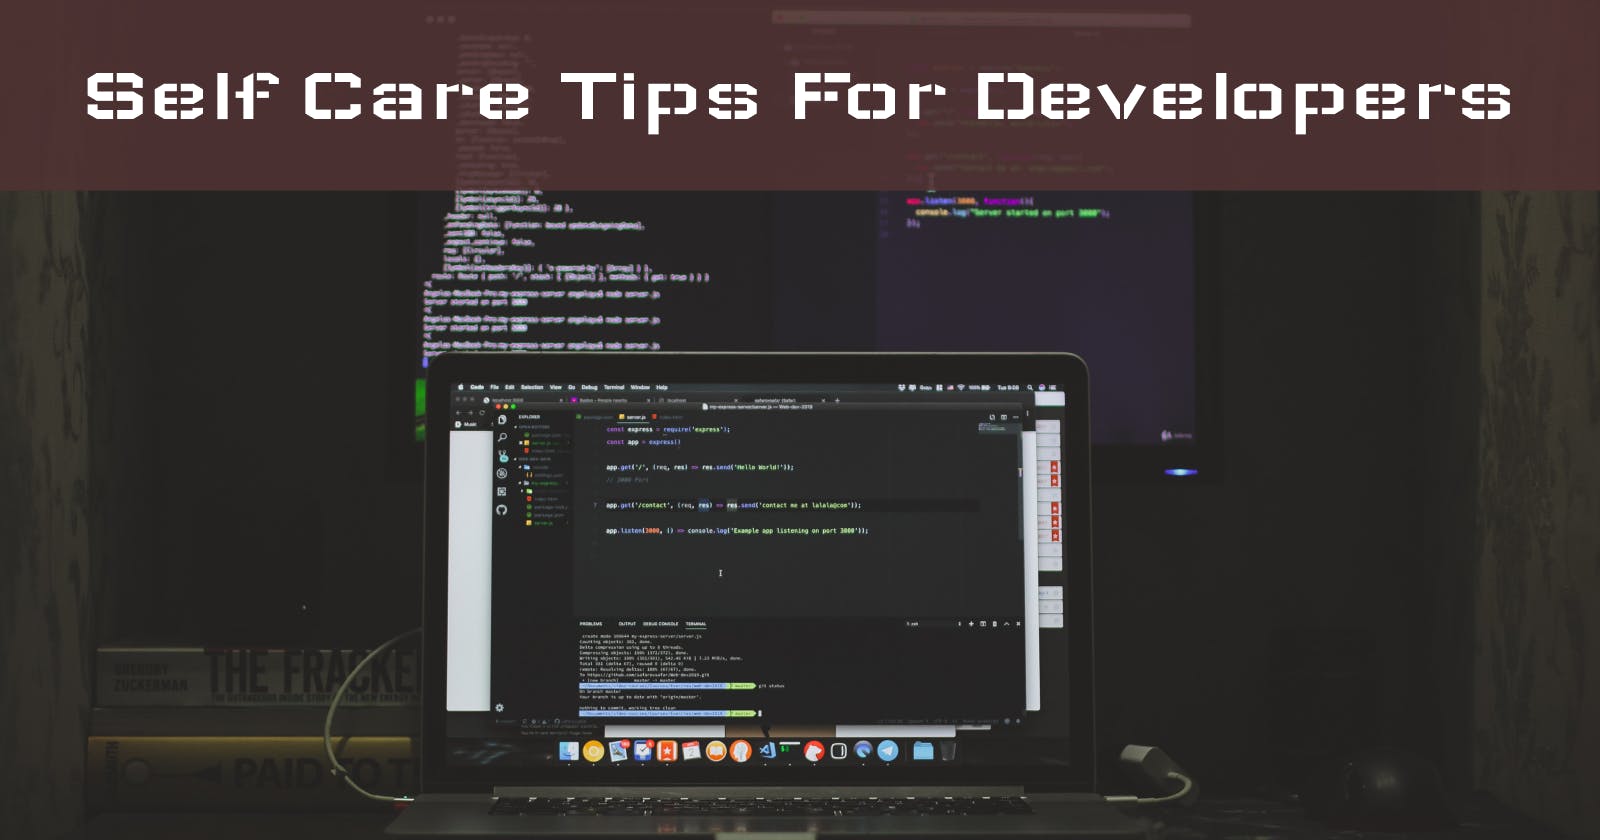 Become a Better Developer with Self Care